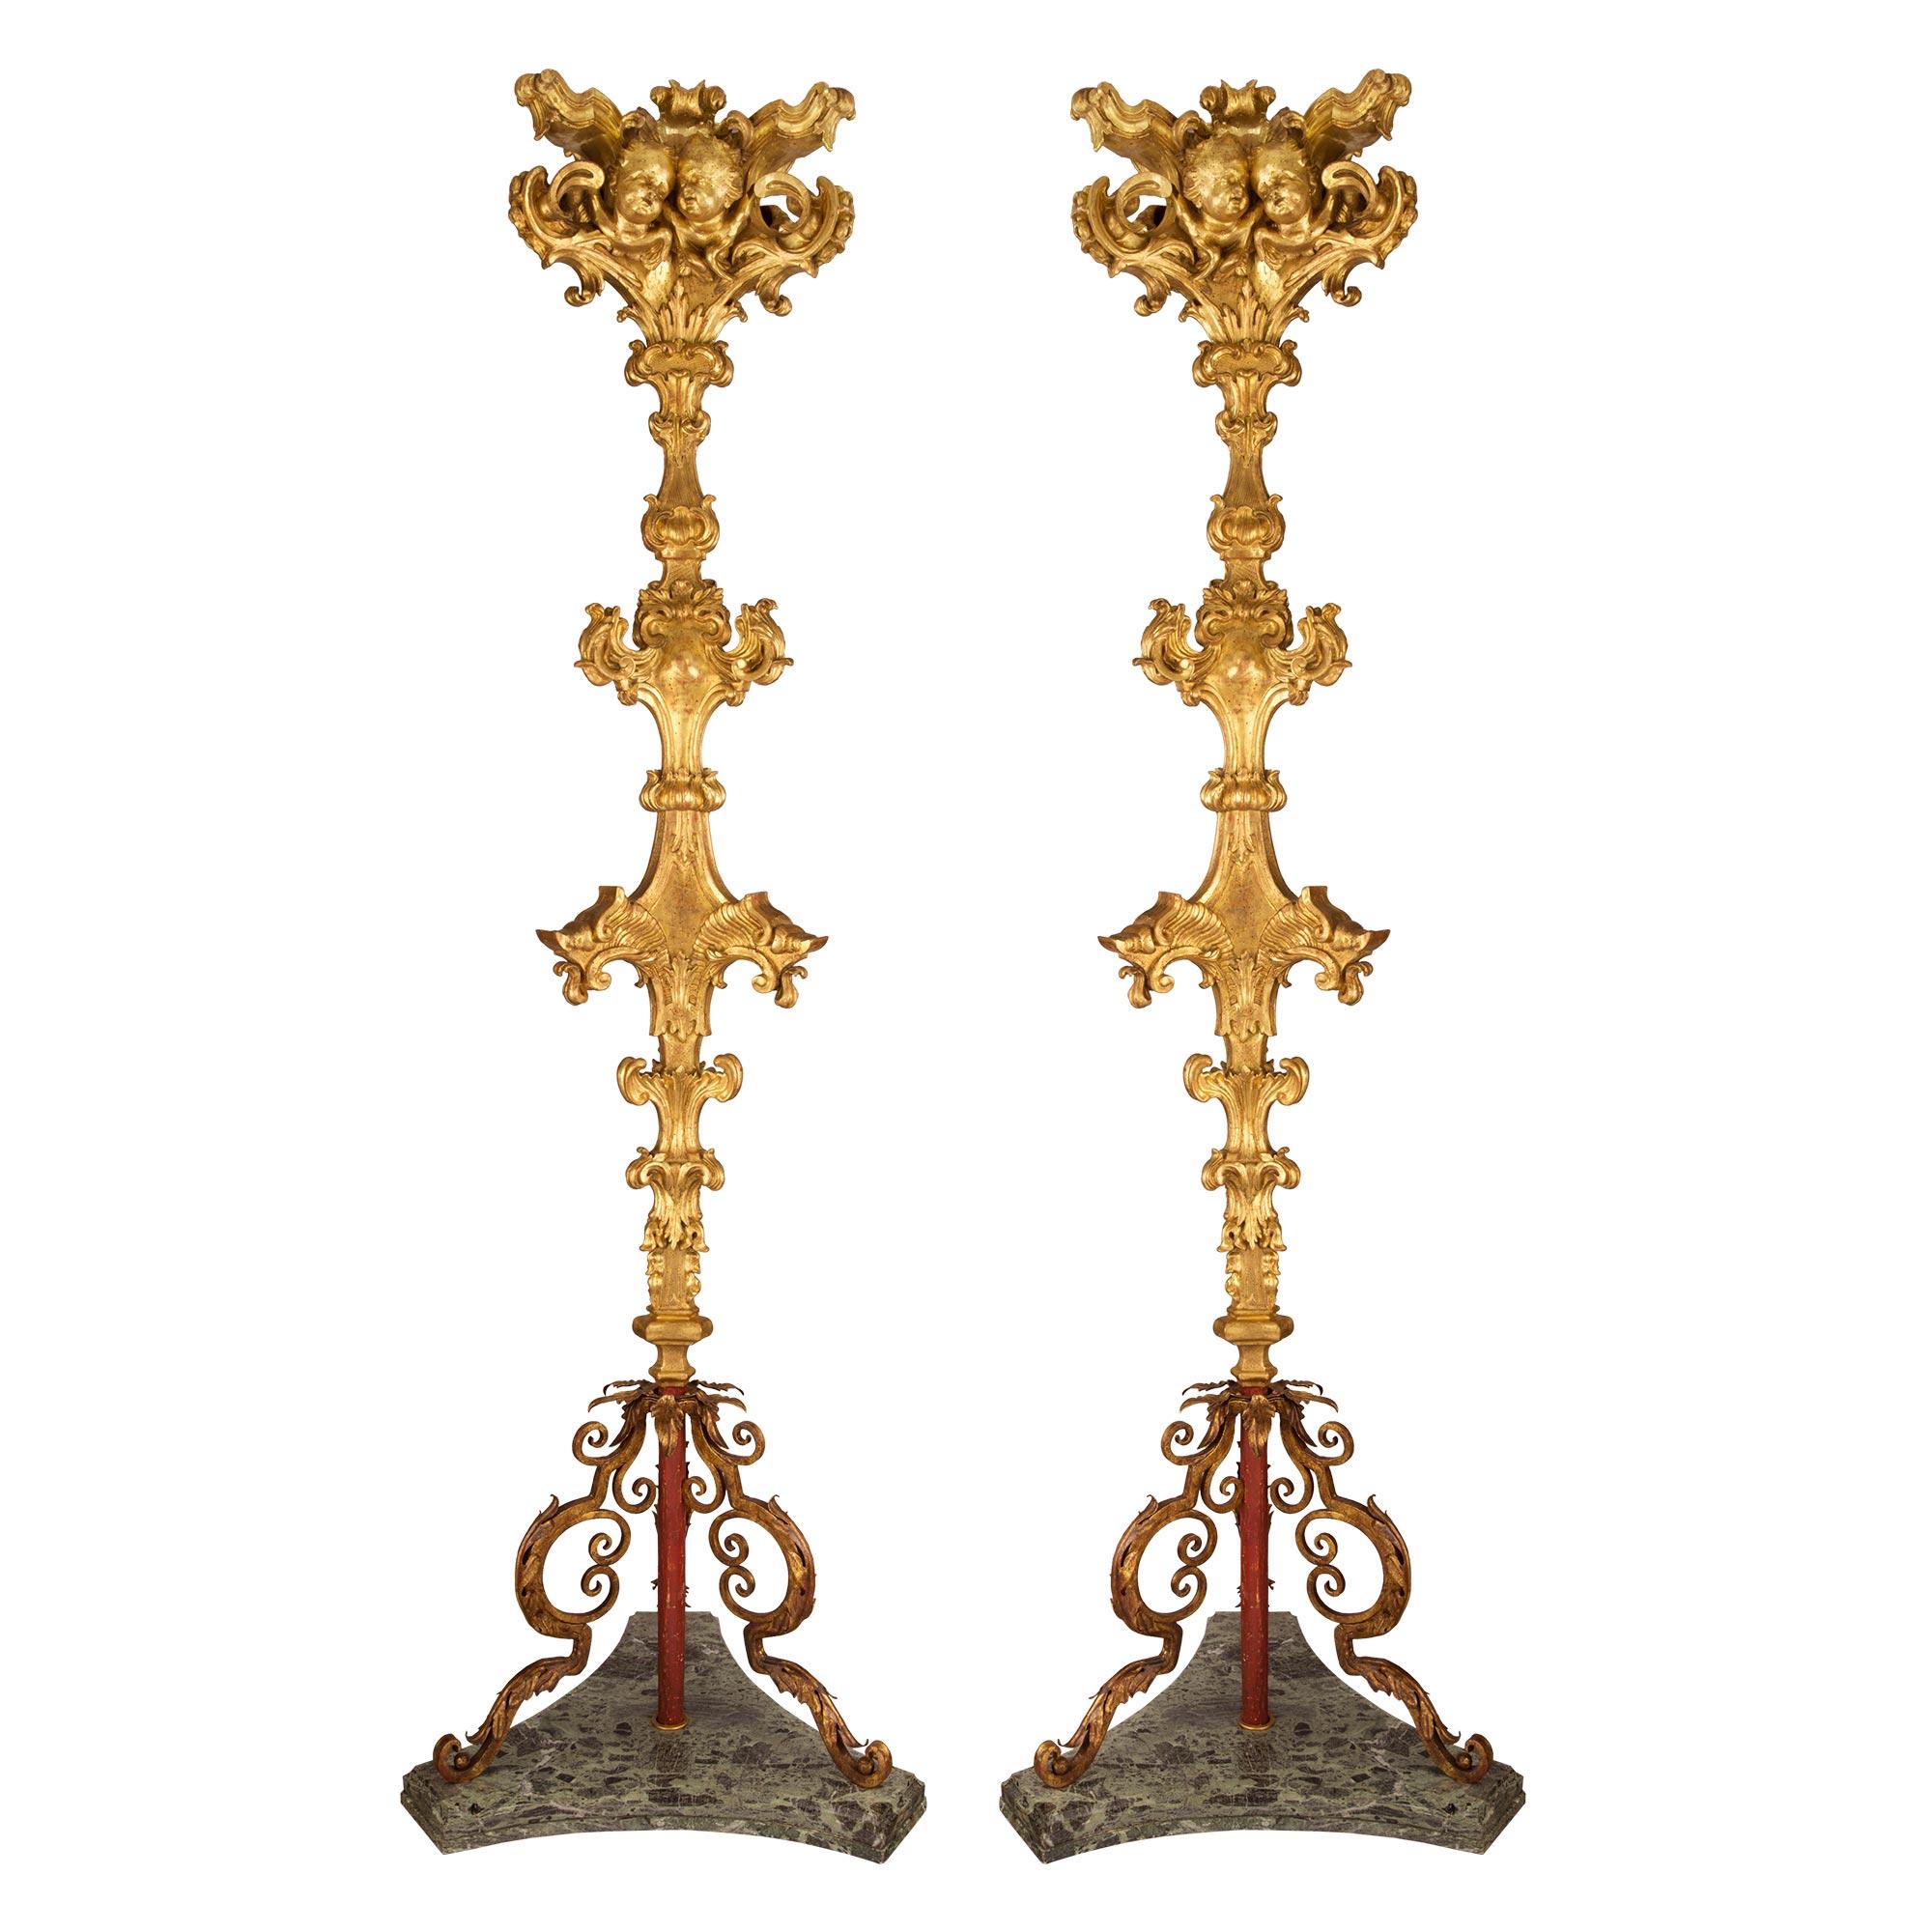 Pair of Italian 17th Century Baroque Period Giltwood Floor Lamps In Good Condition For Sale In West Palm Beach, FL